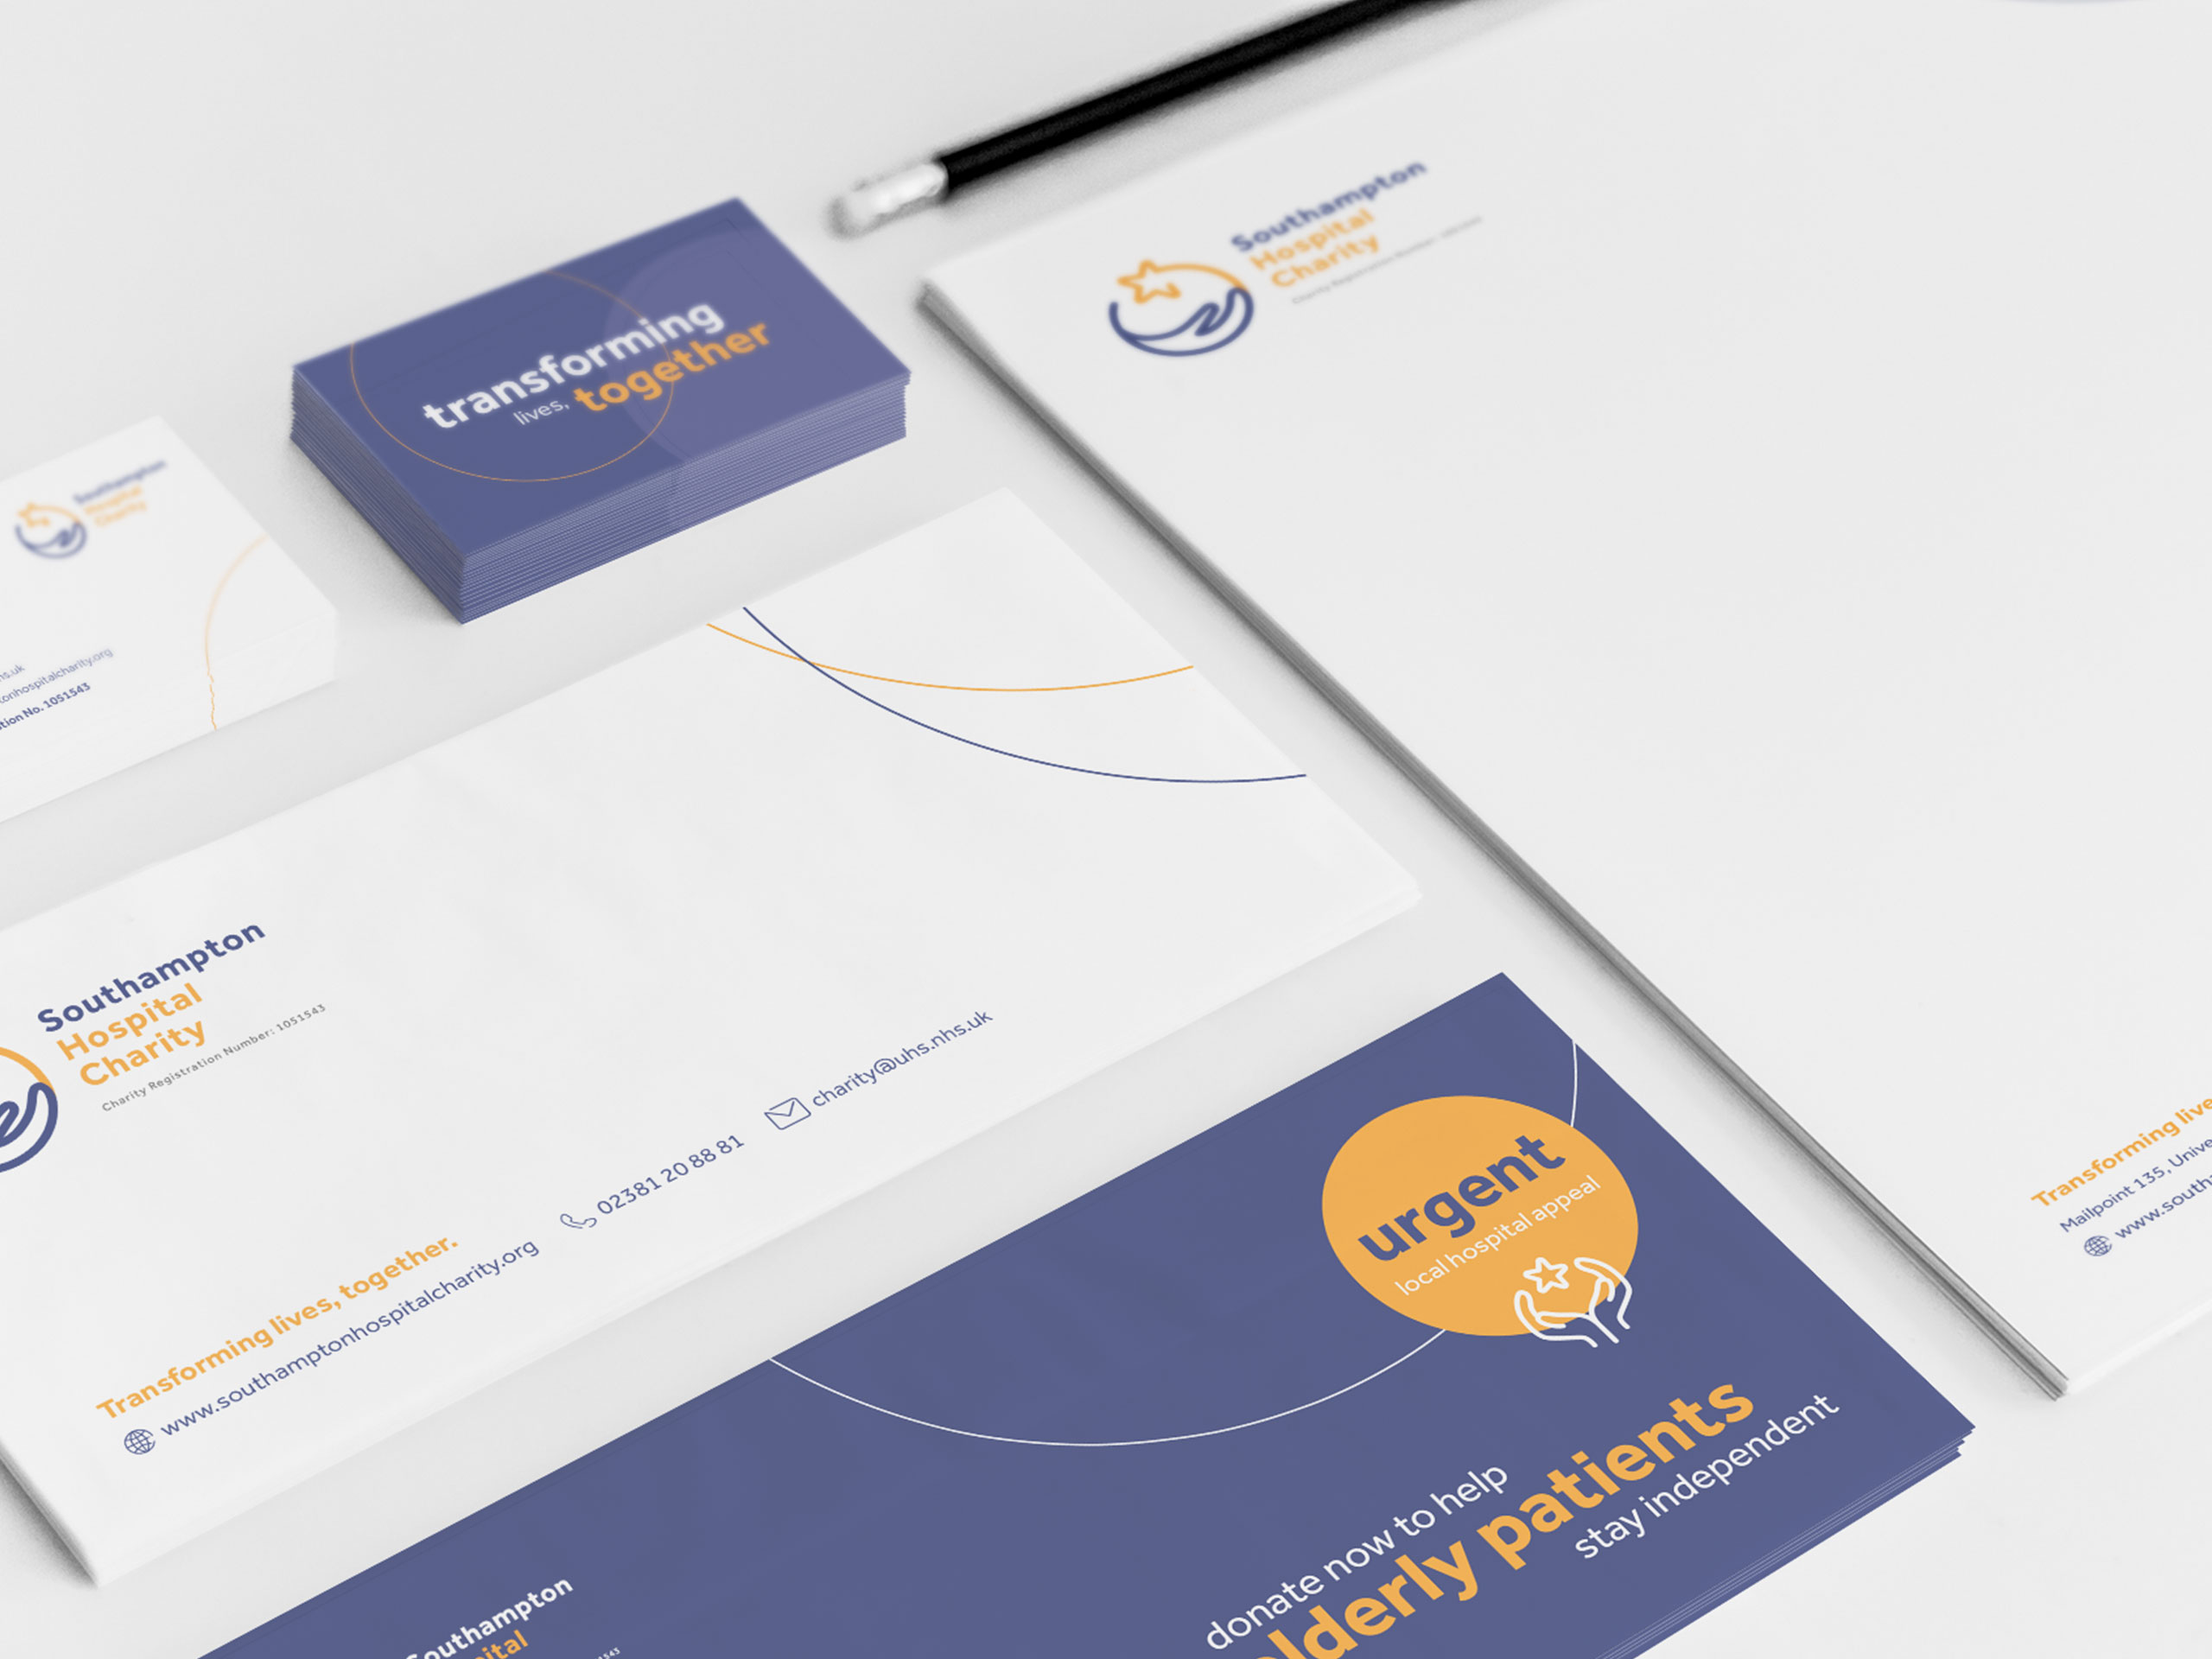 An image to show stationery in the new brand style; letterheads, comp slips and business cards.